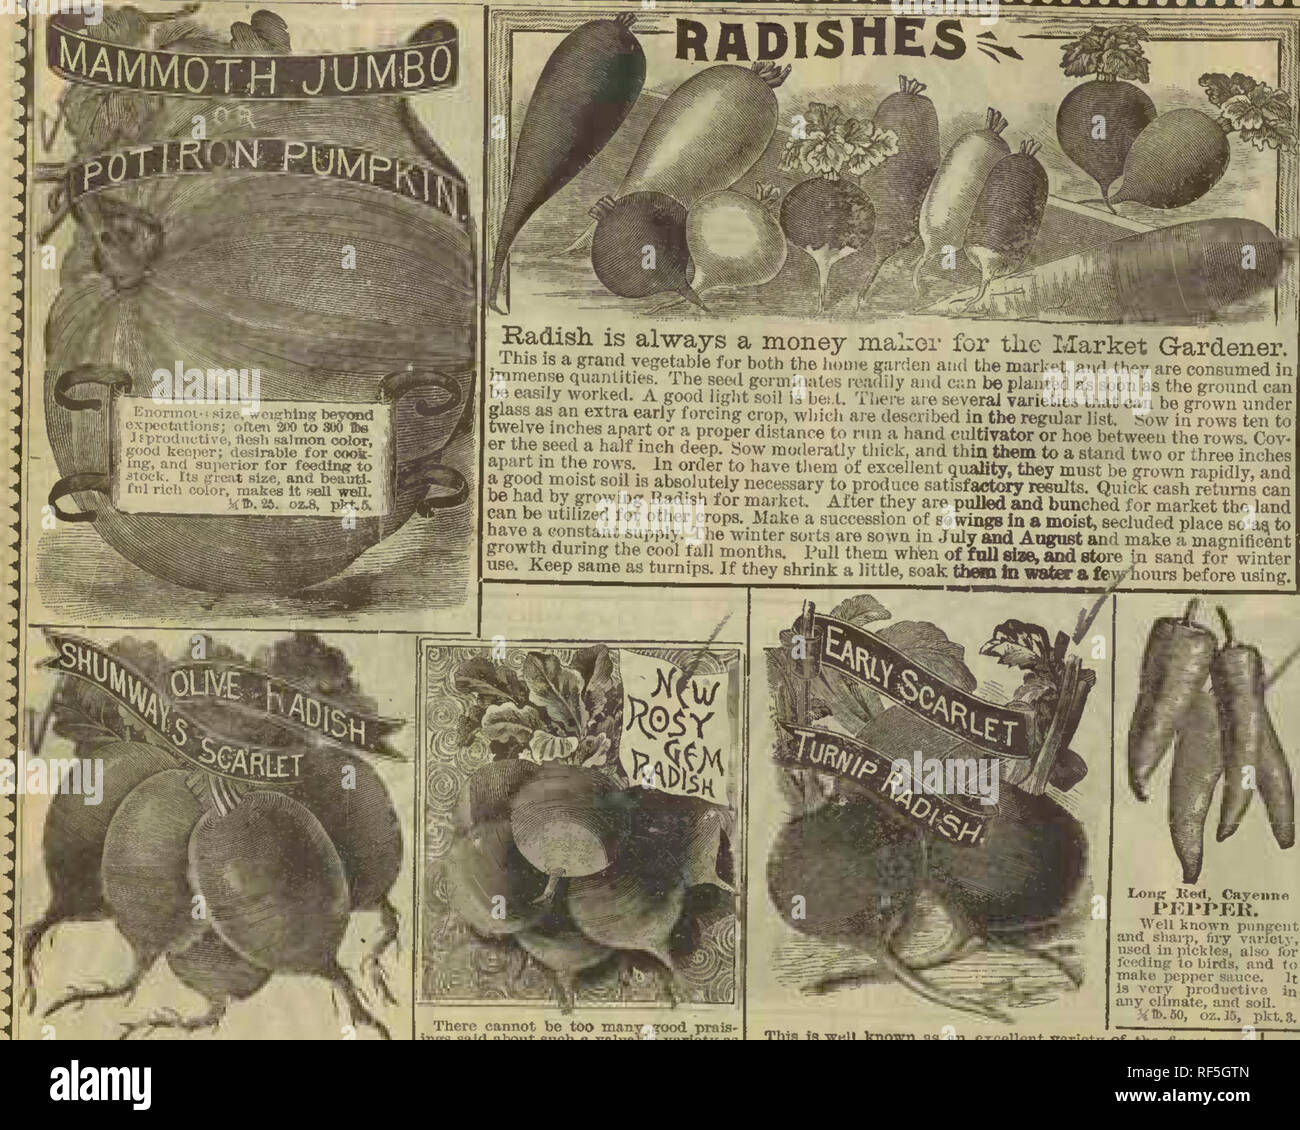 . R.H. Shumway : garden guide. Nursery stock Illinois Rockford Catalogs; Flowers Seeds Catalogs; Vegetables Seeds Catalogs. Radish is always a money malior for tlie Market Gardener. i™^'eYu-f^i1t^^^^^^^ ^•'^^ the hoixe garden and the market, and they are consumed in beS v SkP I A oin^ f ed goi:aiinates i-eadiiy and can be planted as soon as the ground can fflasfaiVn PTtmp^;.|^7?^ ^^'T several varieties that can be grown under twelvfirh^f. n«rf&quot;'&quot;^'&quot;^ • &quot;&quot;'''^i' described in the regular list. Sow ii? rows ten to jTZVllft J^f^^ P™^'^'' distance to run a hand cultivator  Stock Photo